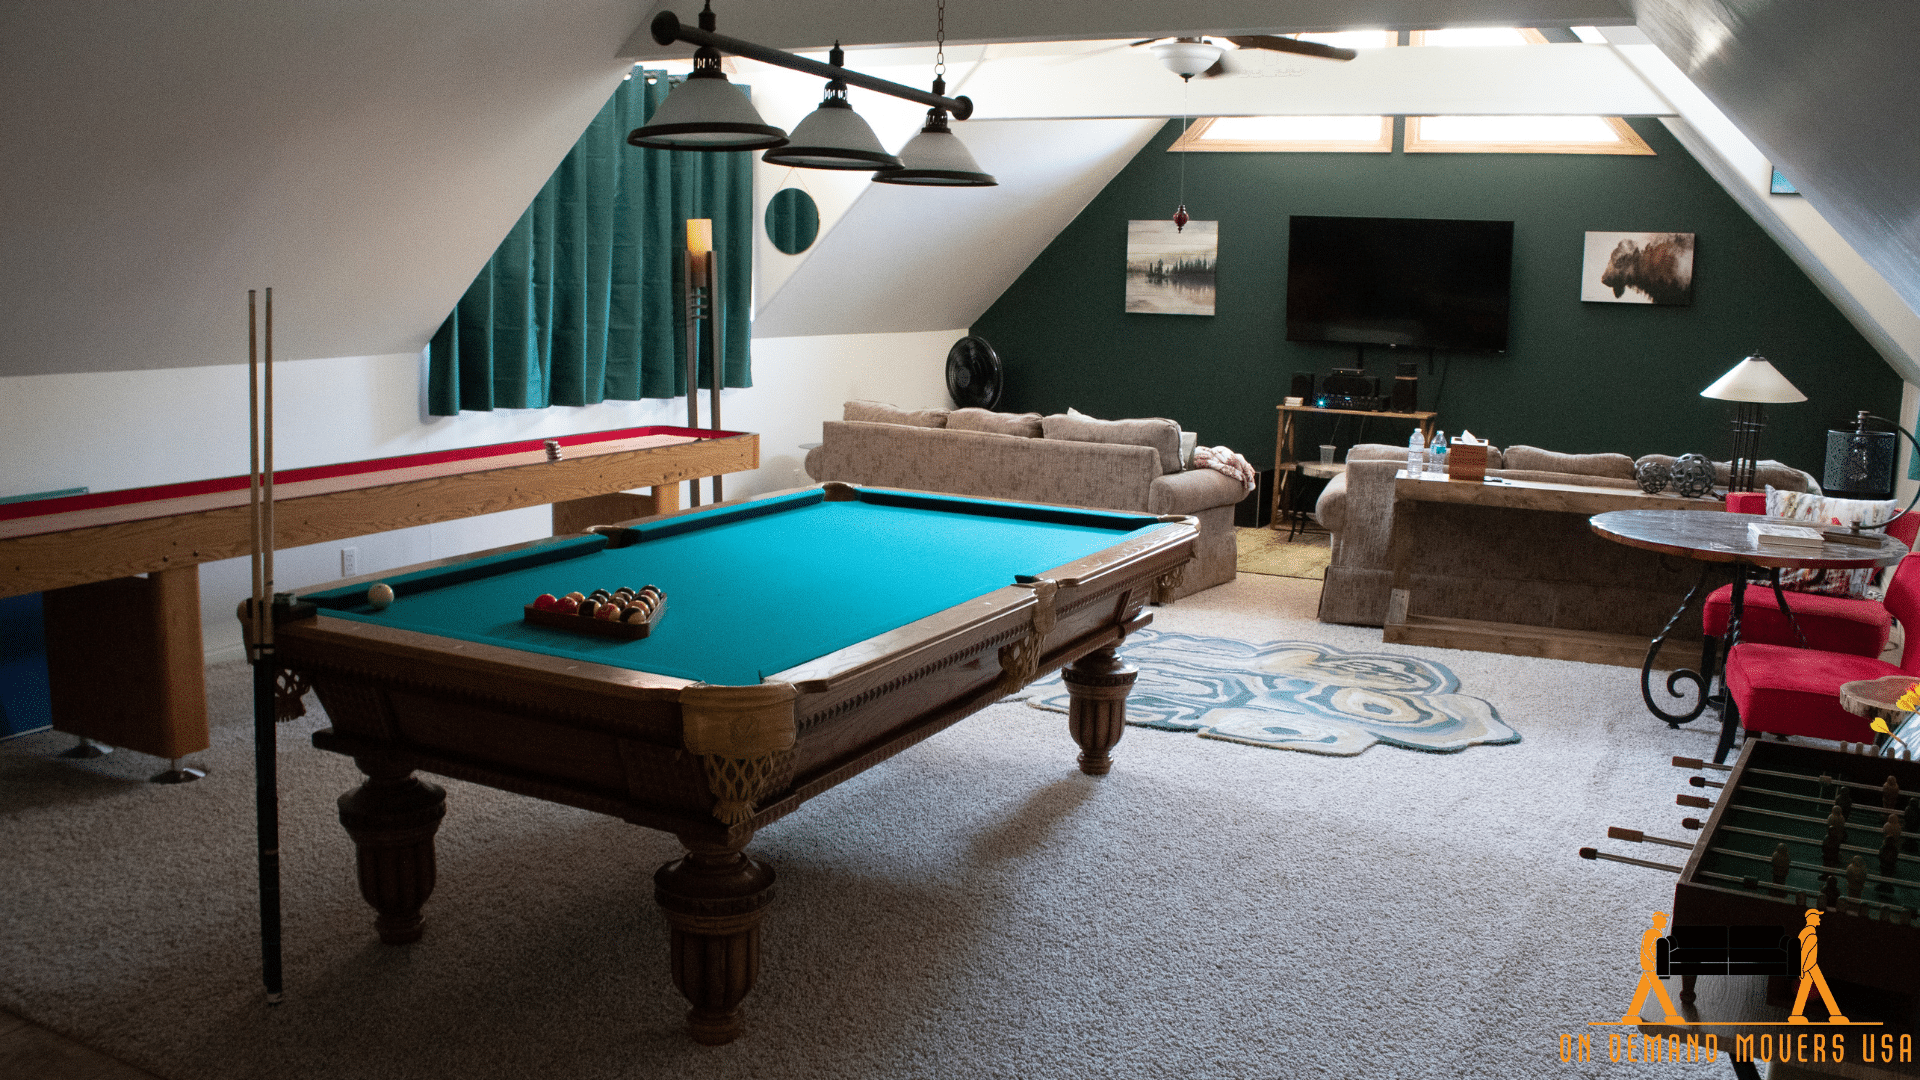 Cary IL Pool Table Movers